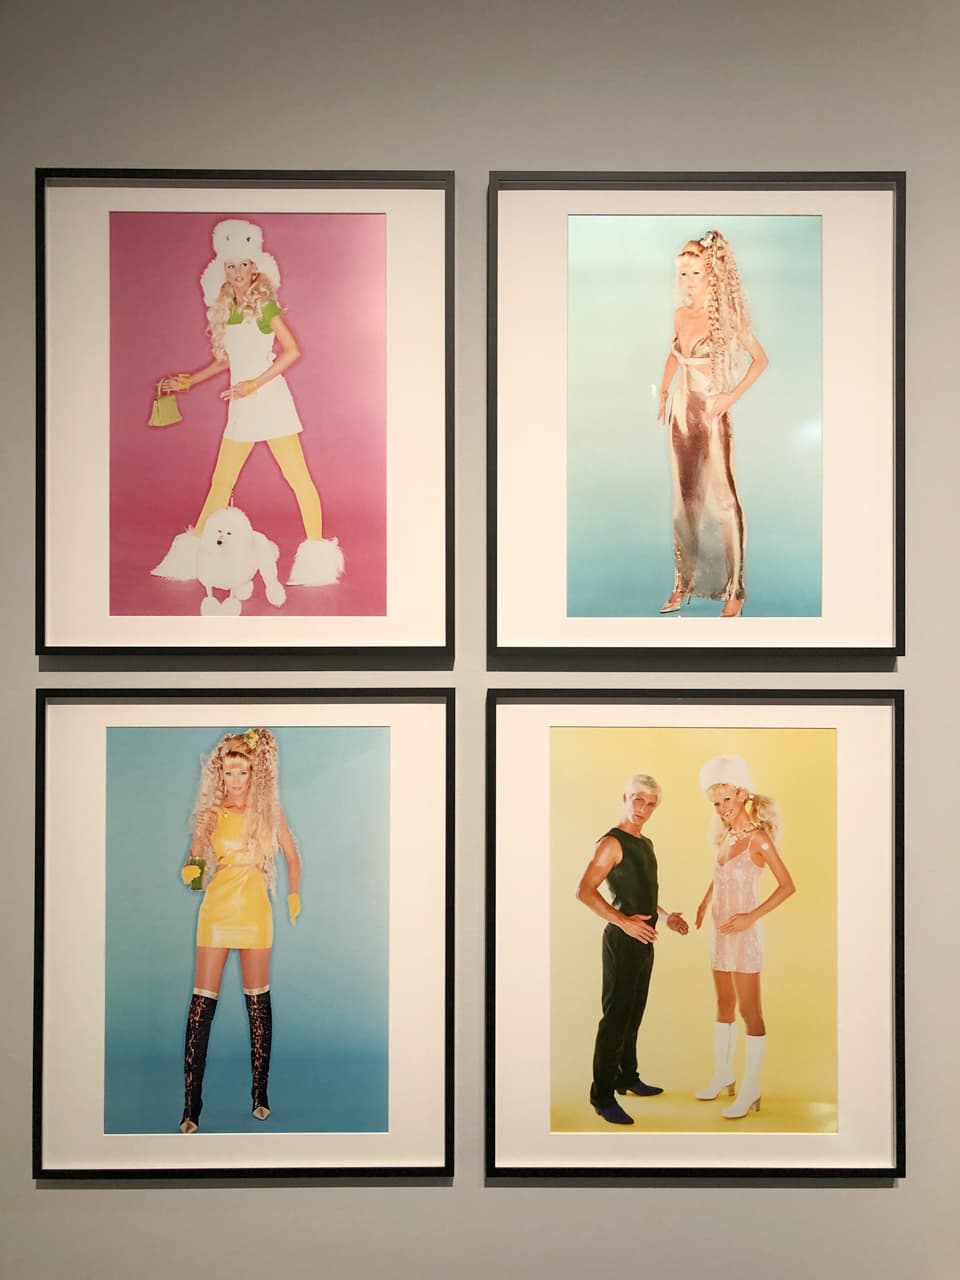 Four framed photos portraying a man and a woman against pink, blue and yellow backgrounds